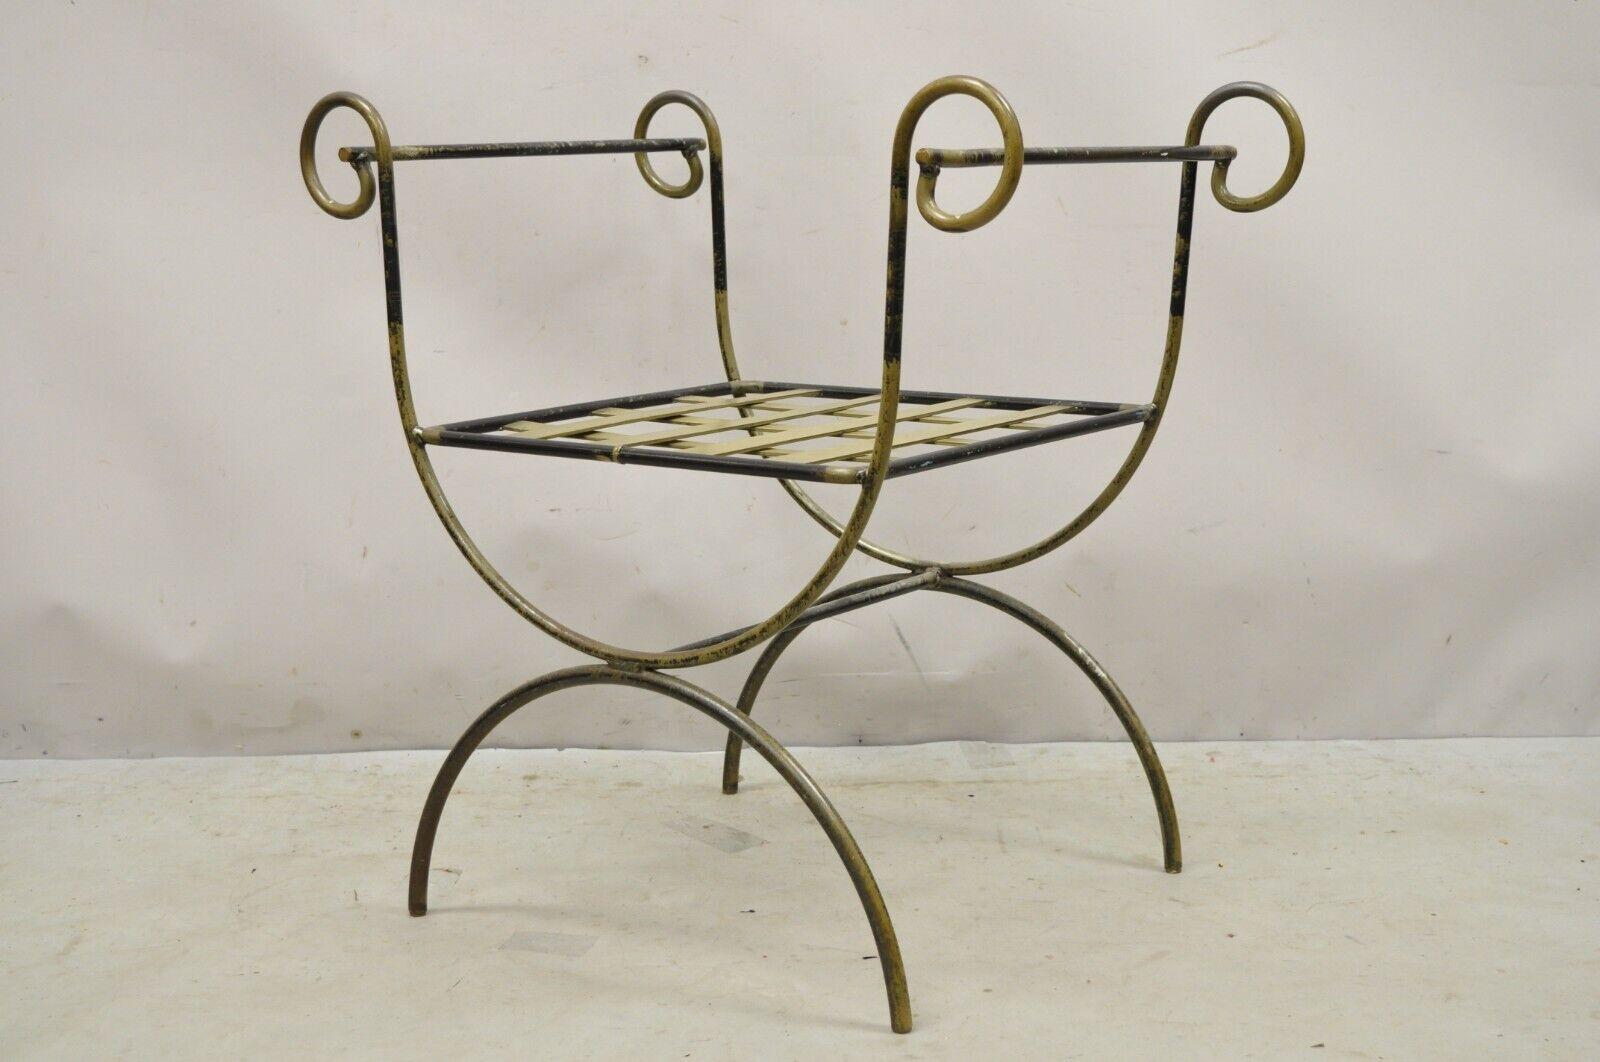 Vintage Neoclassical Style Curule Savonarola Wrought Iron Bench. Item features shapely curule/savonarola form base, wrought iron construction, distressed finish, very nice vintage item, quality craftsmanship, great style and form. circa late 20th